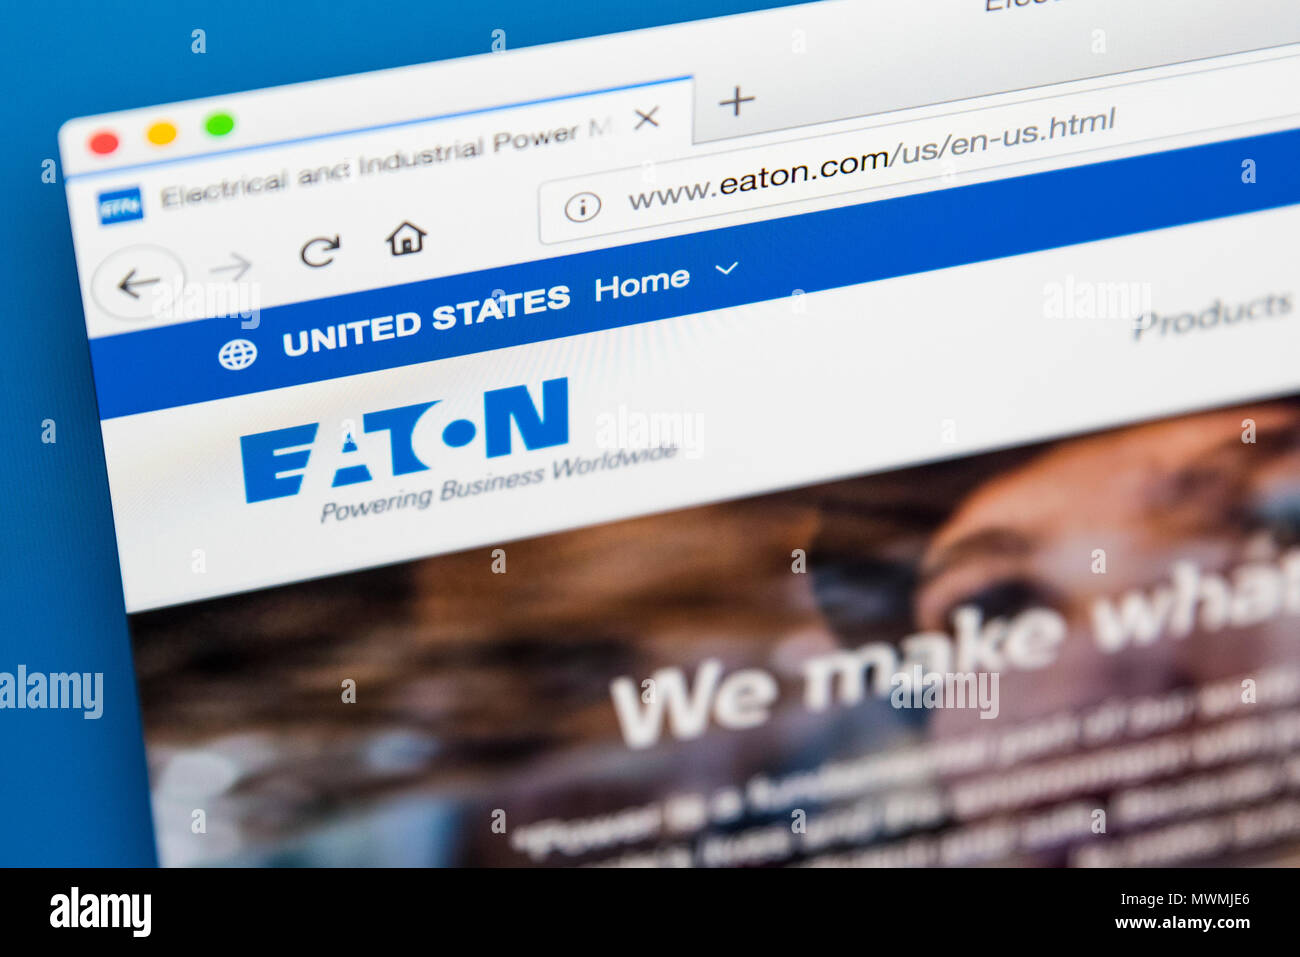 LONDON, UK - MAY 31ST 2018: The homepage of the official website for Eaton Corporation Plc - the multinational power management company, on 31st May 2 Stock Photo